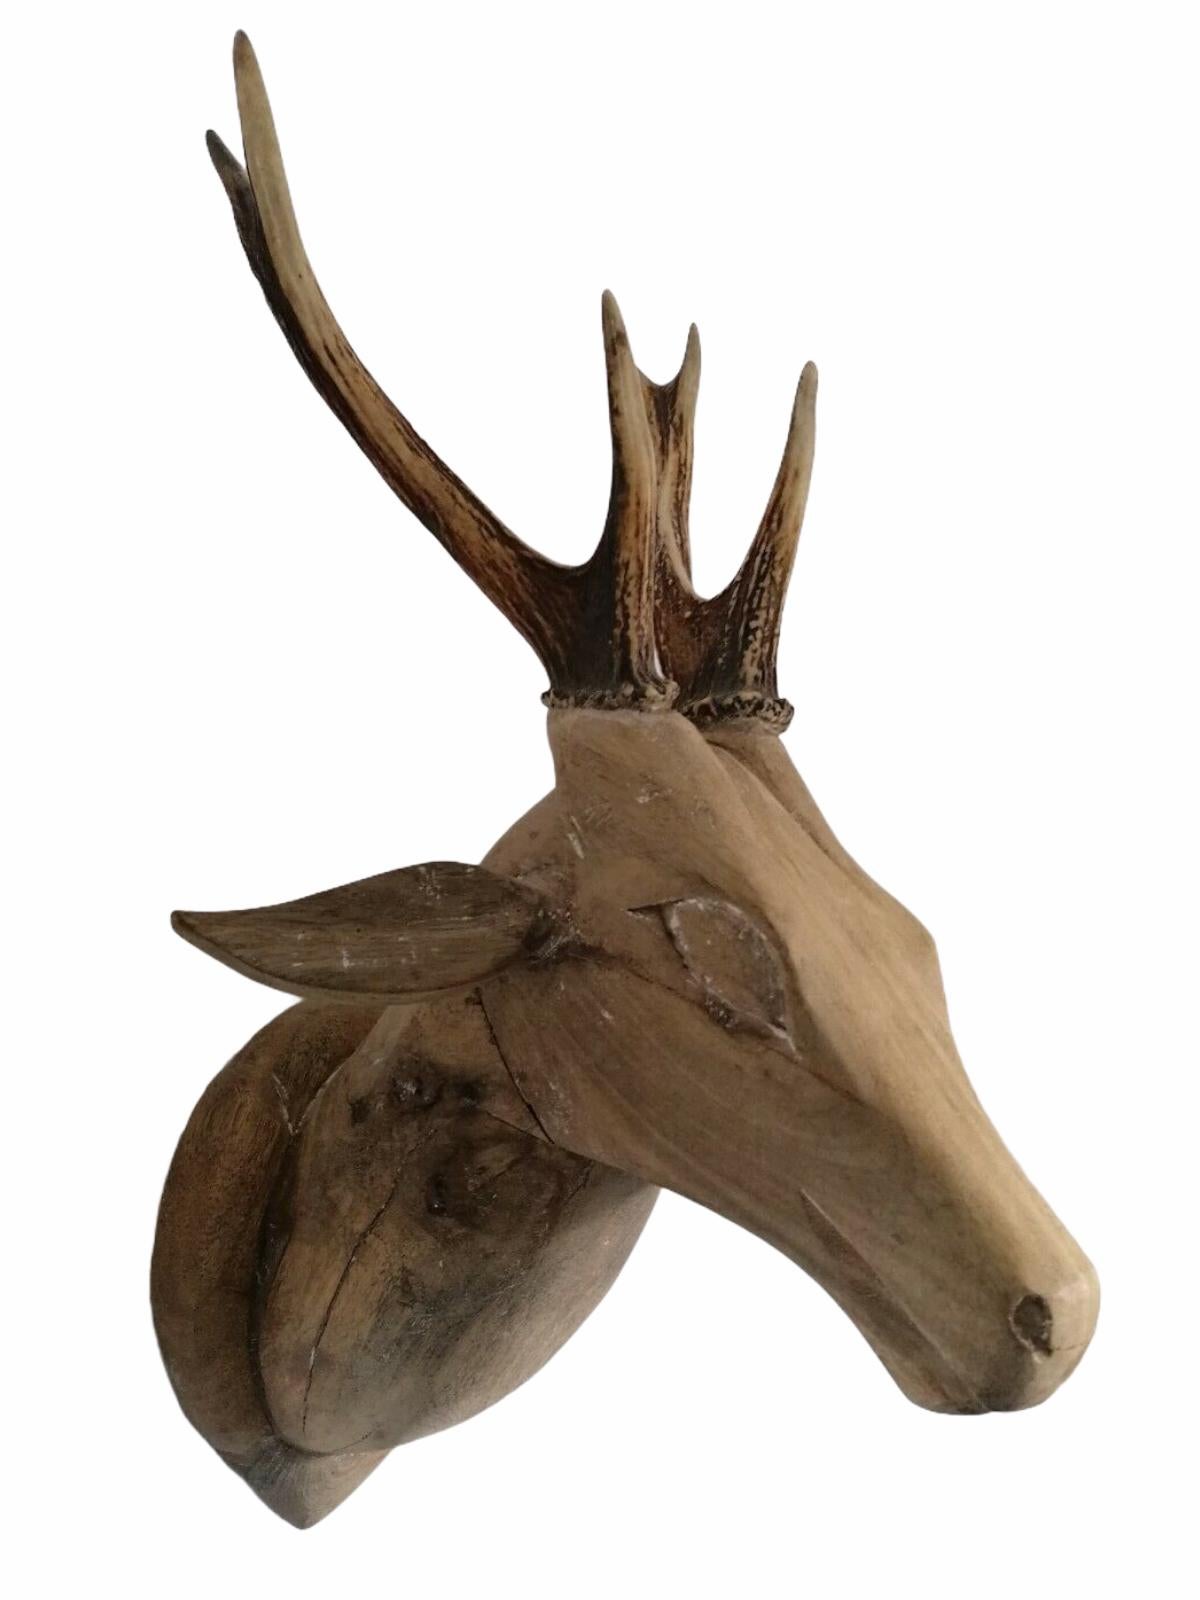 A great looking hand carved original wooden Folk Art deer head wall decoration. A great piece for a suitable ambiance in a trophy room or the office of a Hunter or Woodsman. More than likely one of the Folk Art items made between 1860 and the late